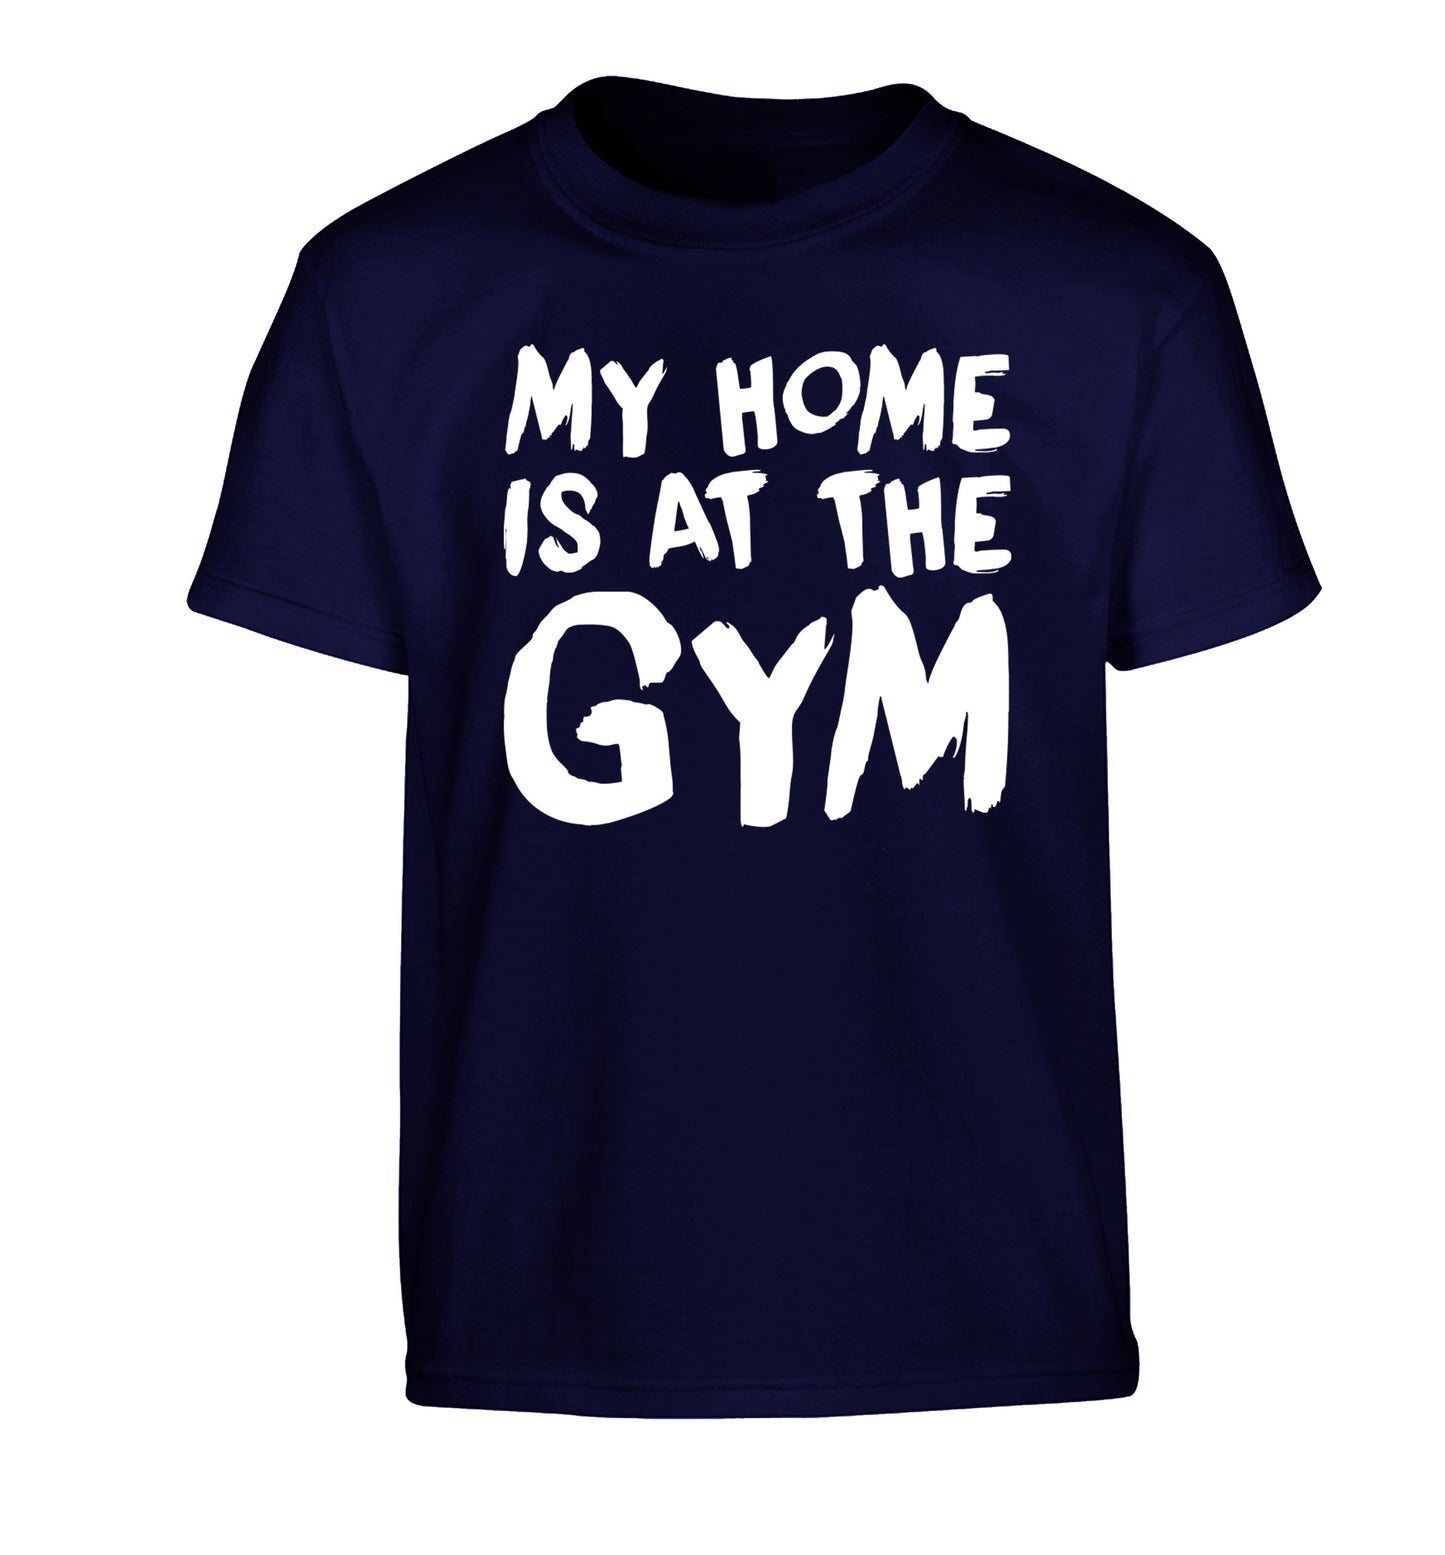 My home is at the gym Children's navy Tshirt 12-14 Years